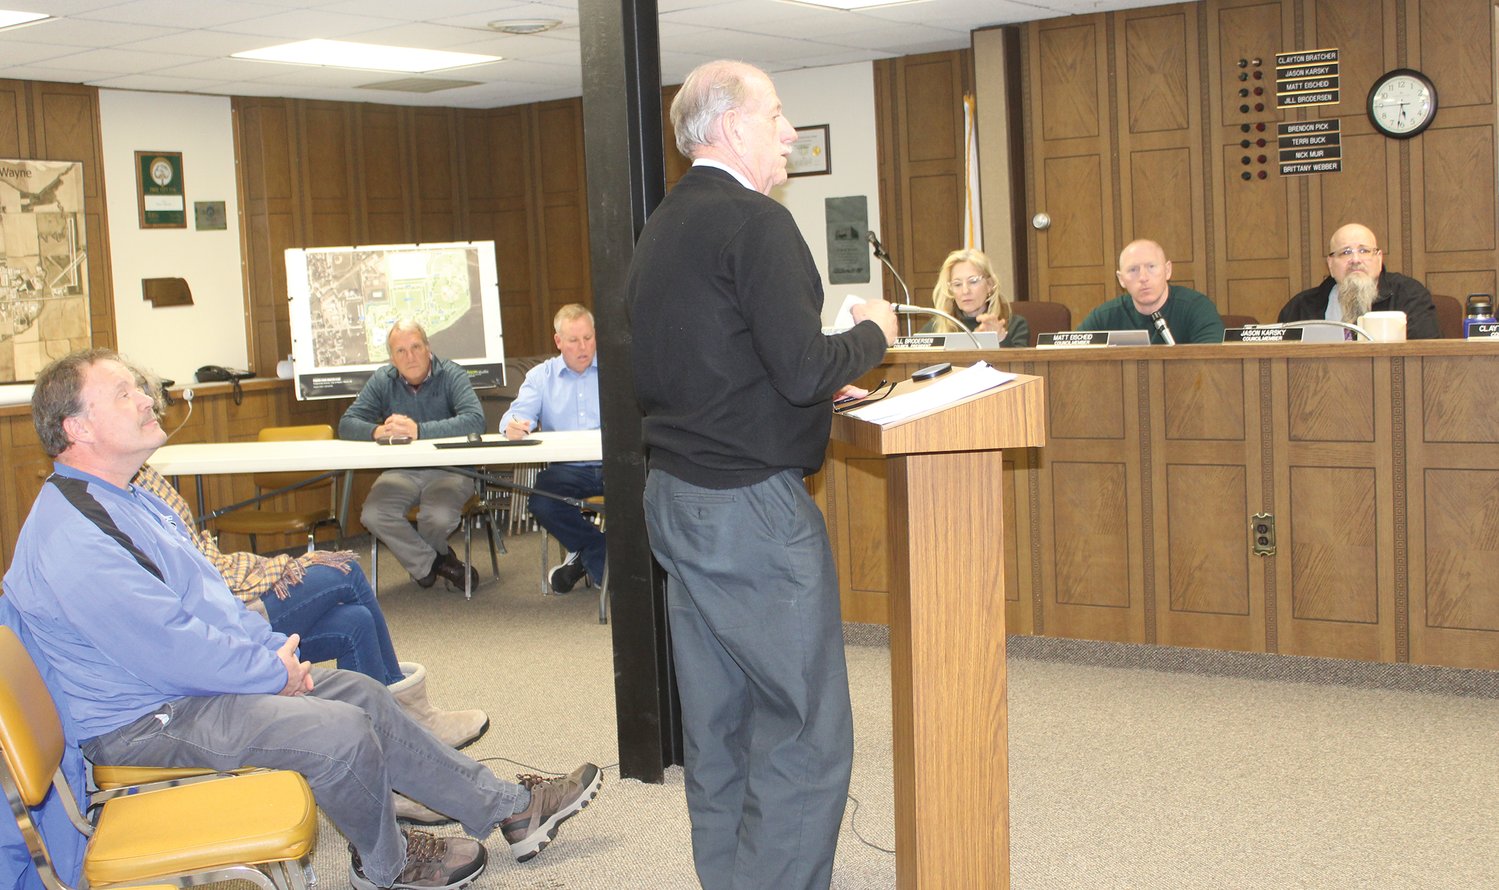 Cap Peterson with Northeast Nebraska Insurance Agency (at the podium) talked about the city's property insurance coverage at Tuesday's city council meeting.